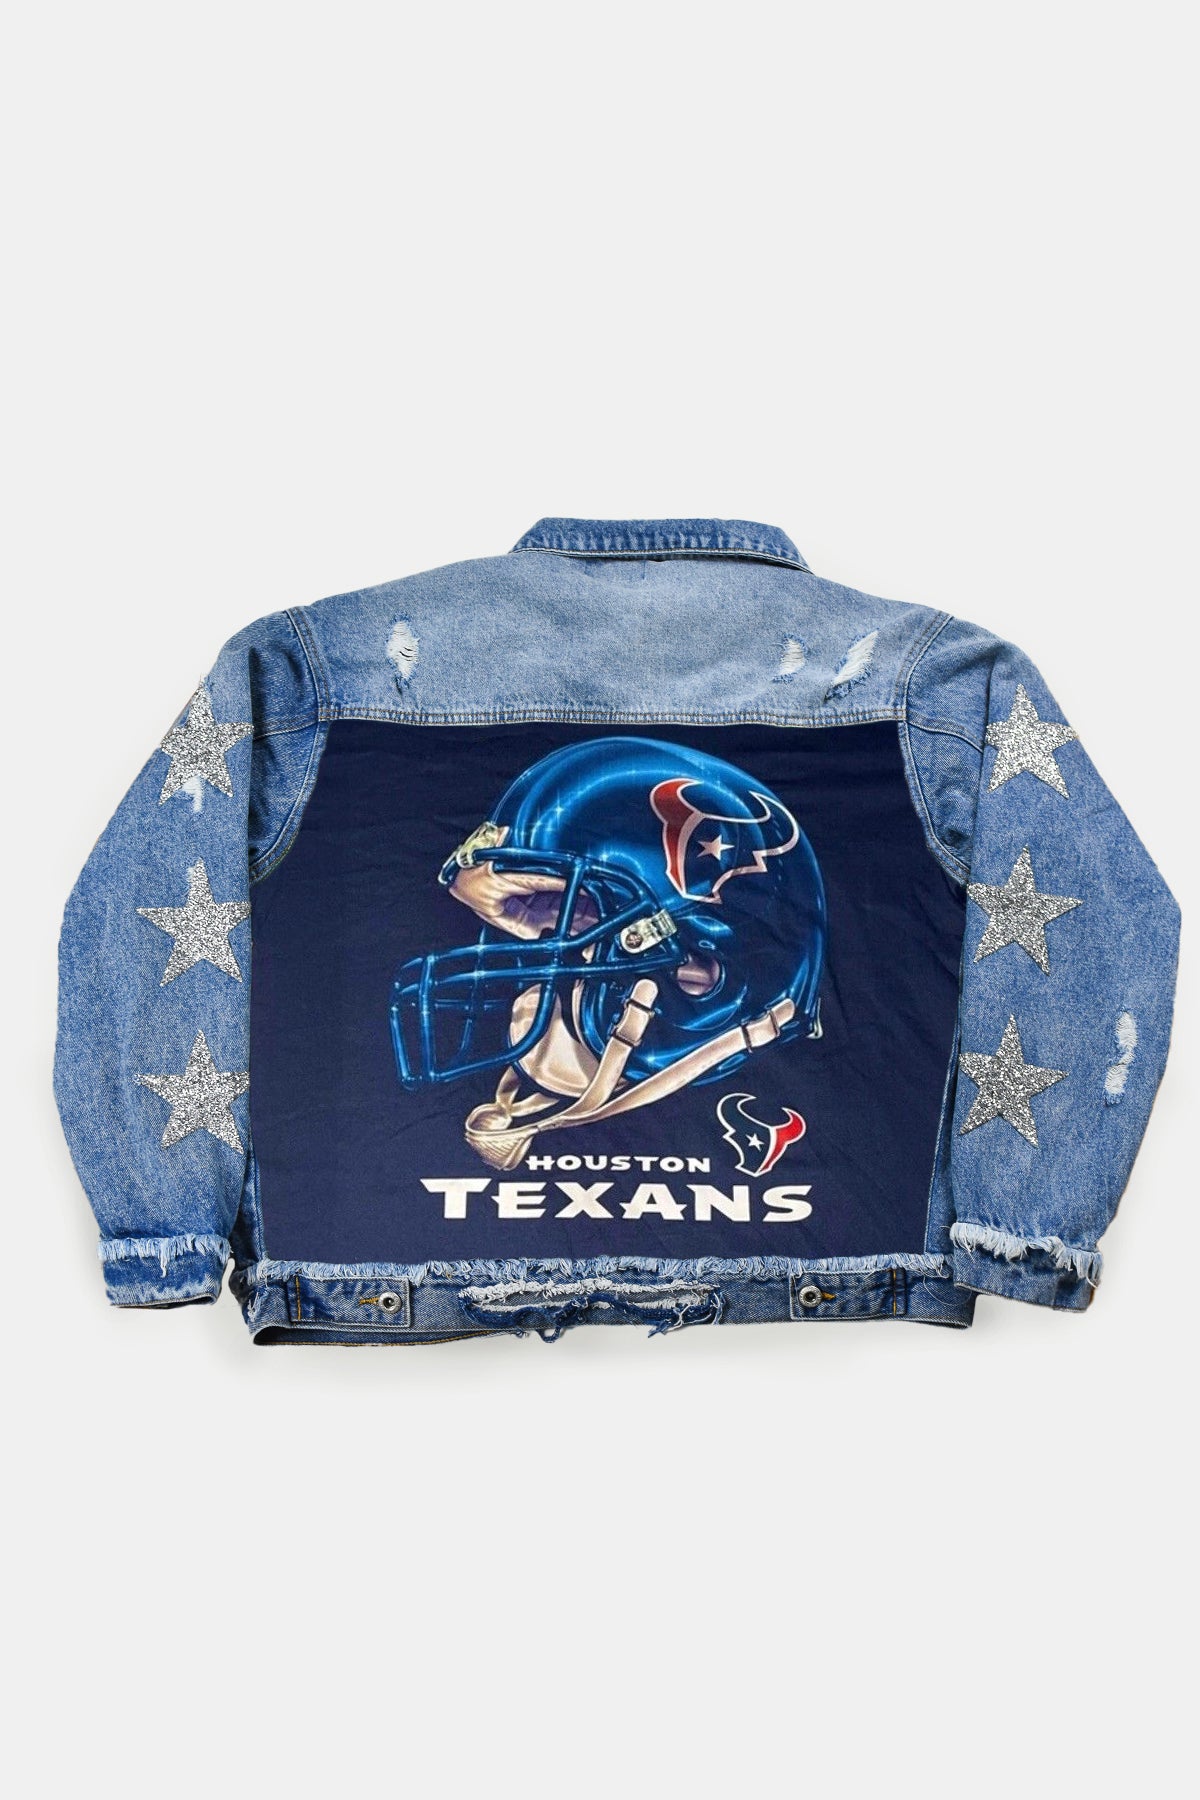 Upcycled Texans Star Patchwork Jacket